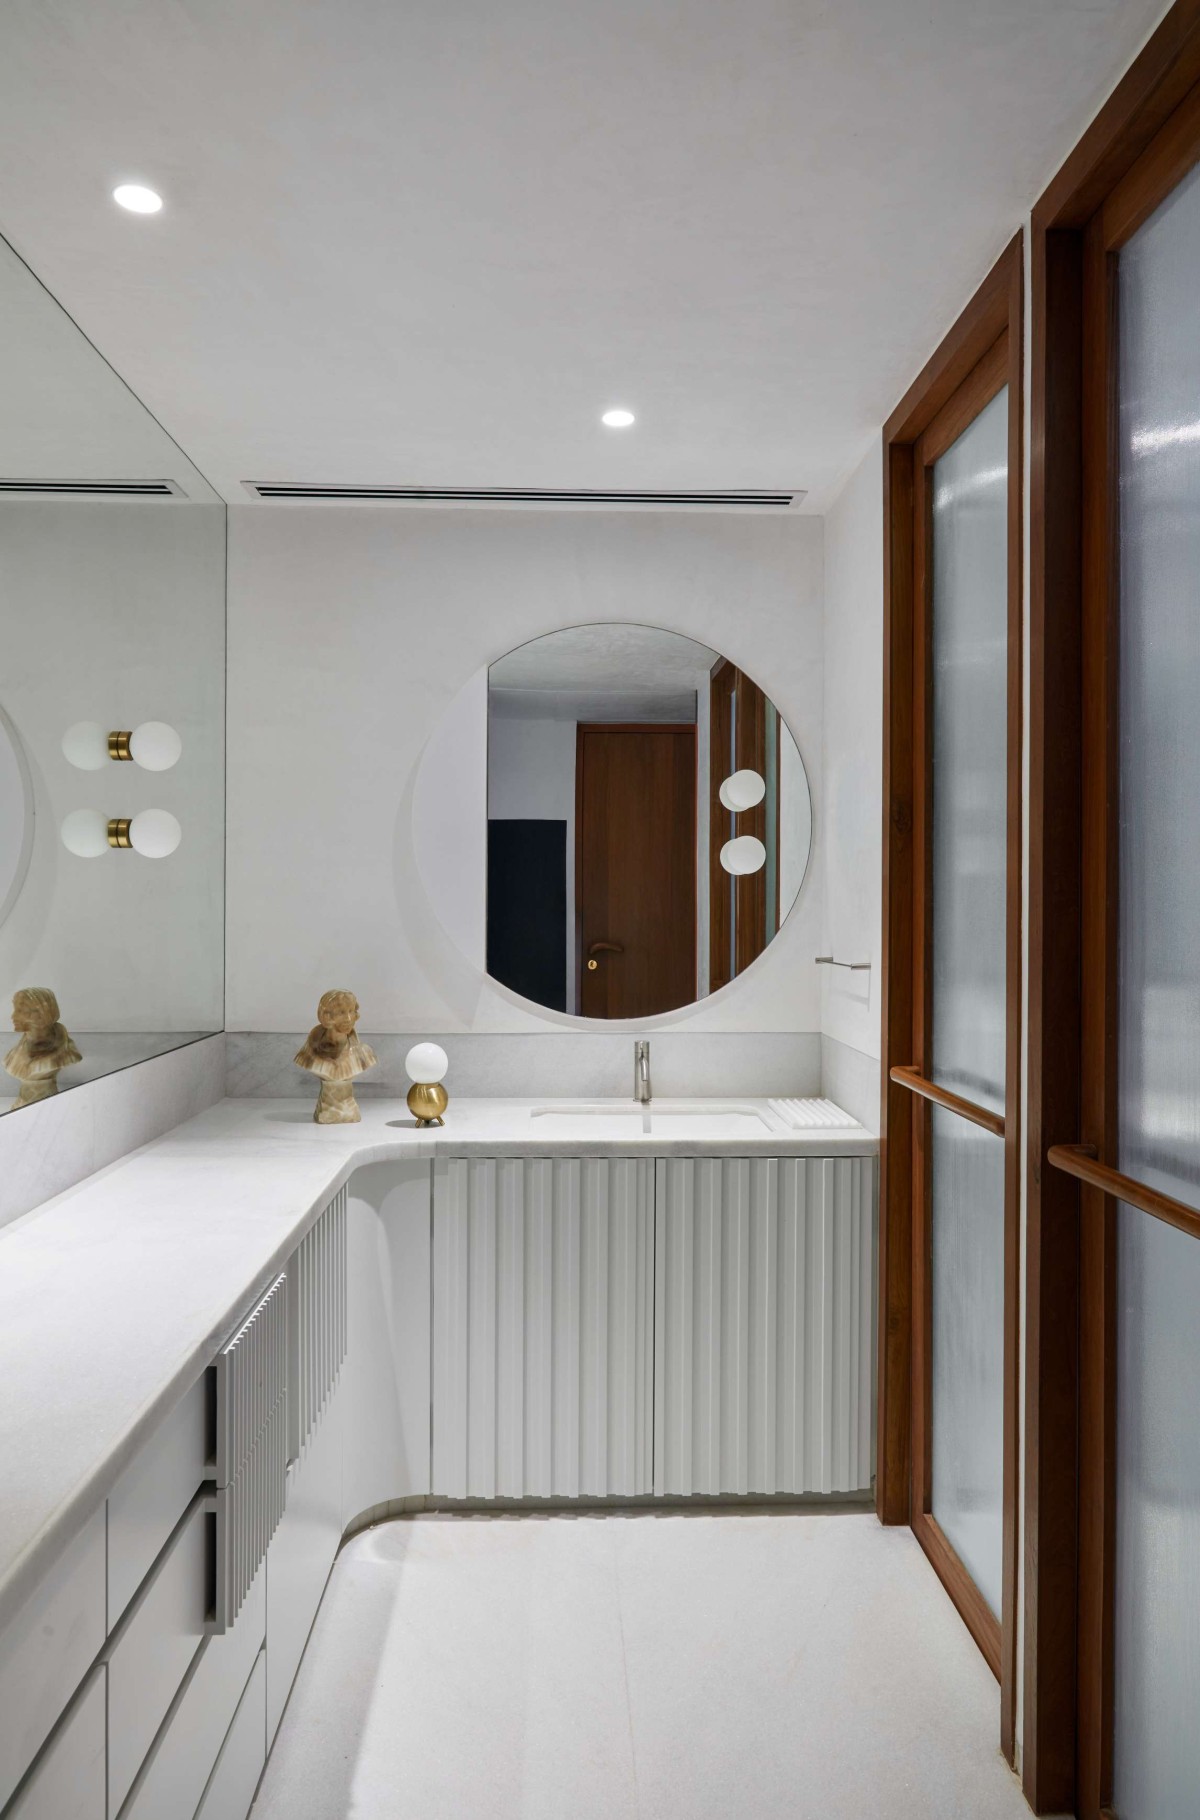 Dresser and toilet of The Zen Apartment by Atelier Varun Goyal